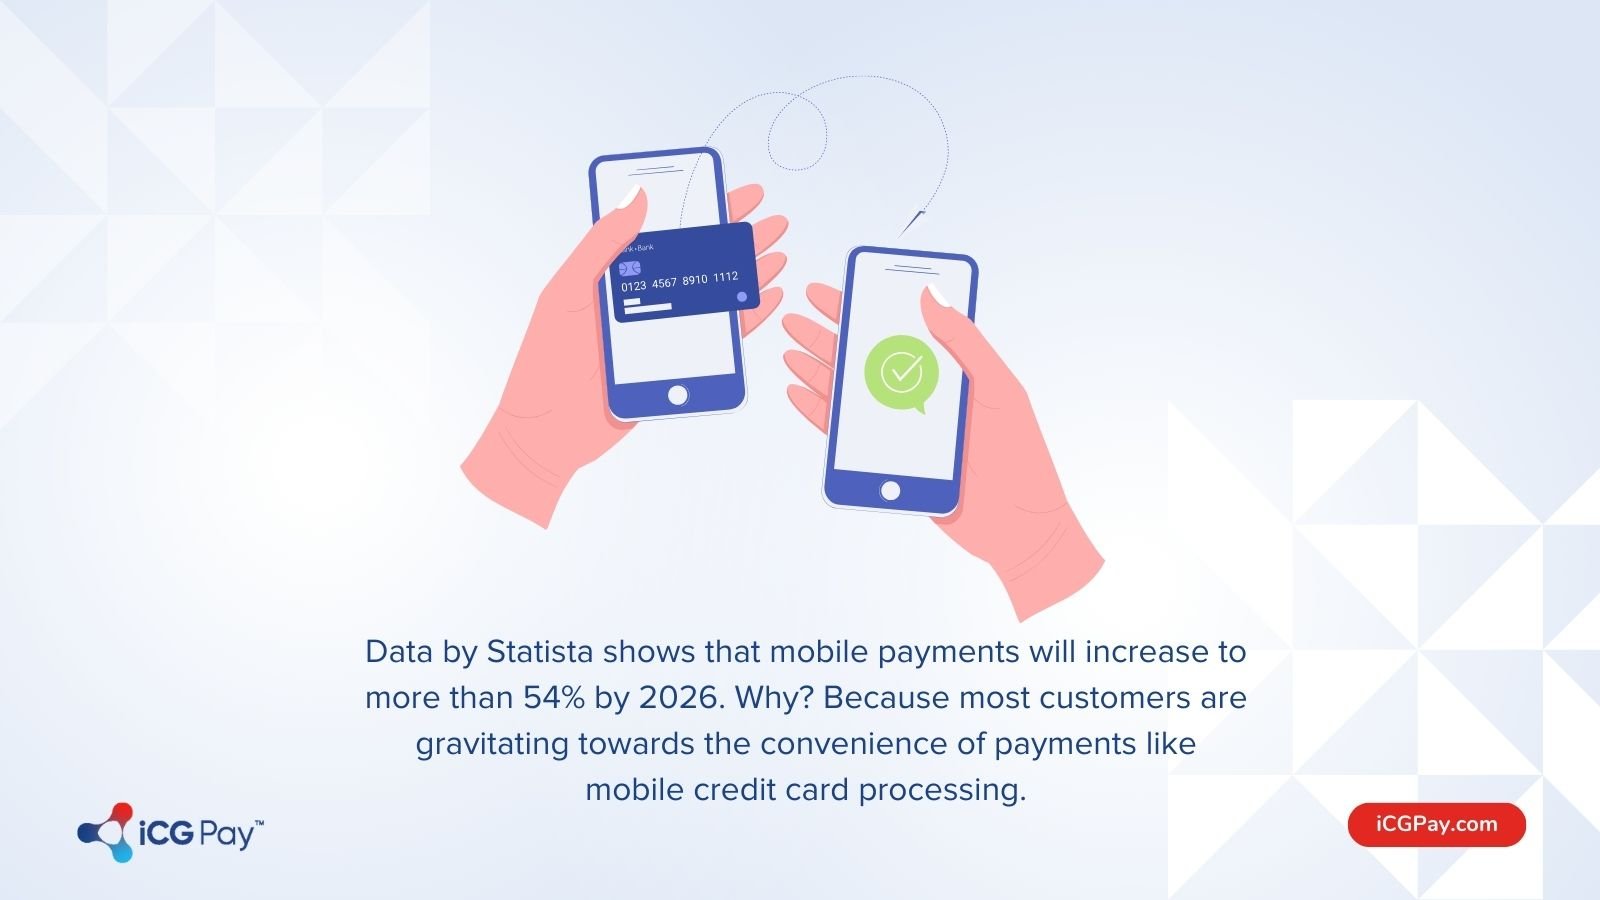 Projected increase in mobile payments